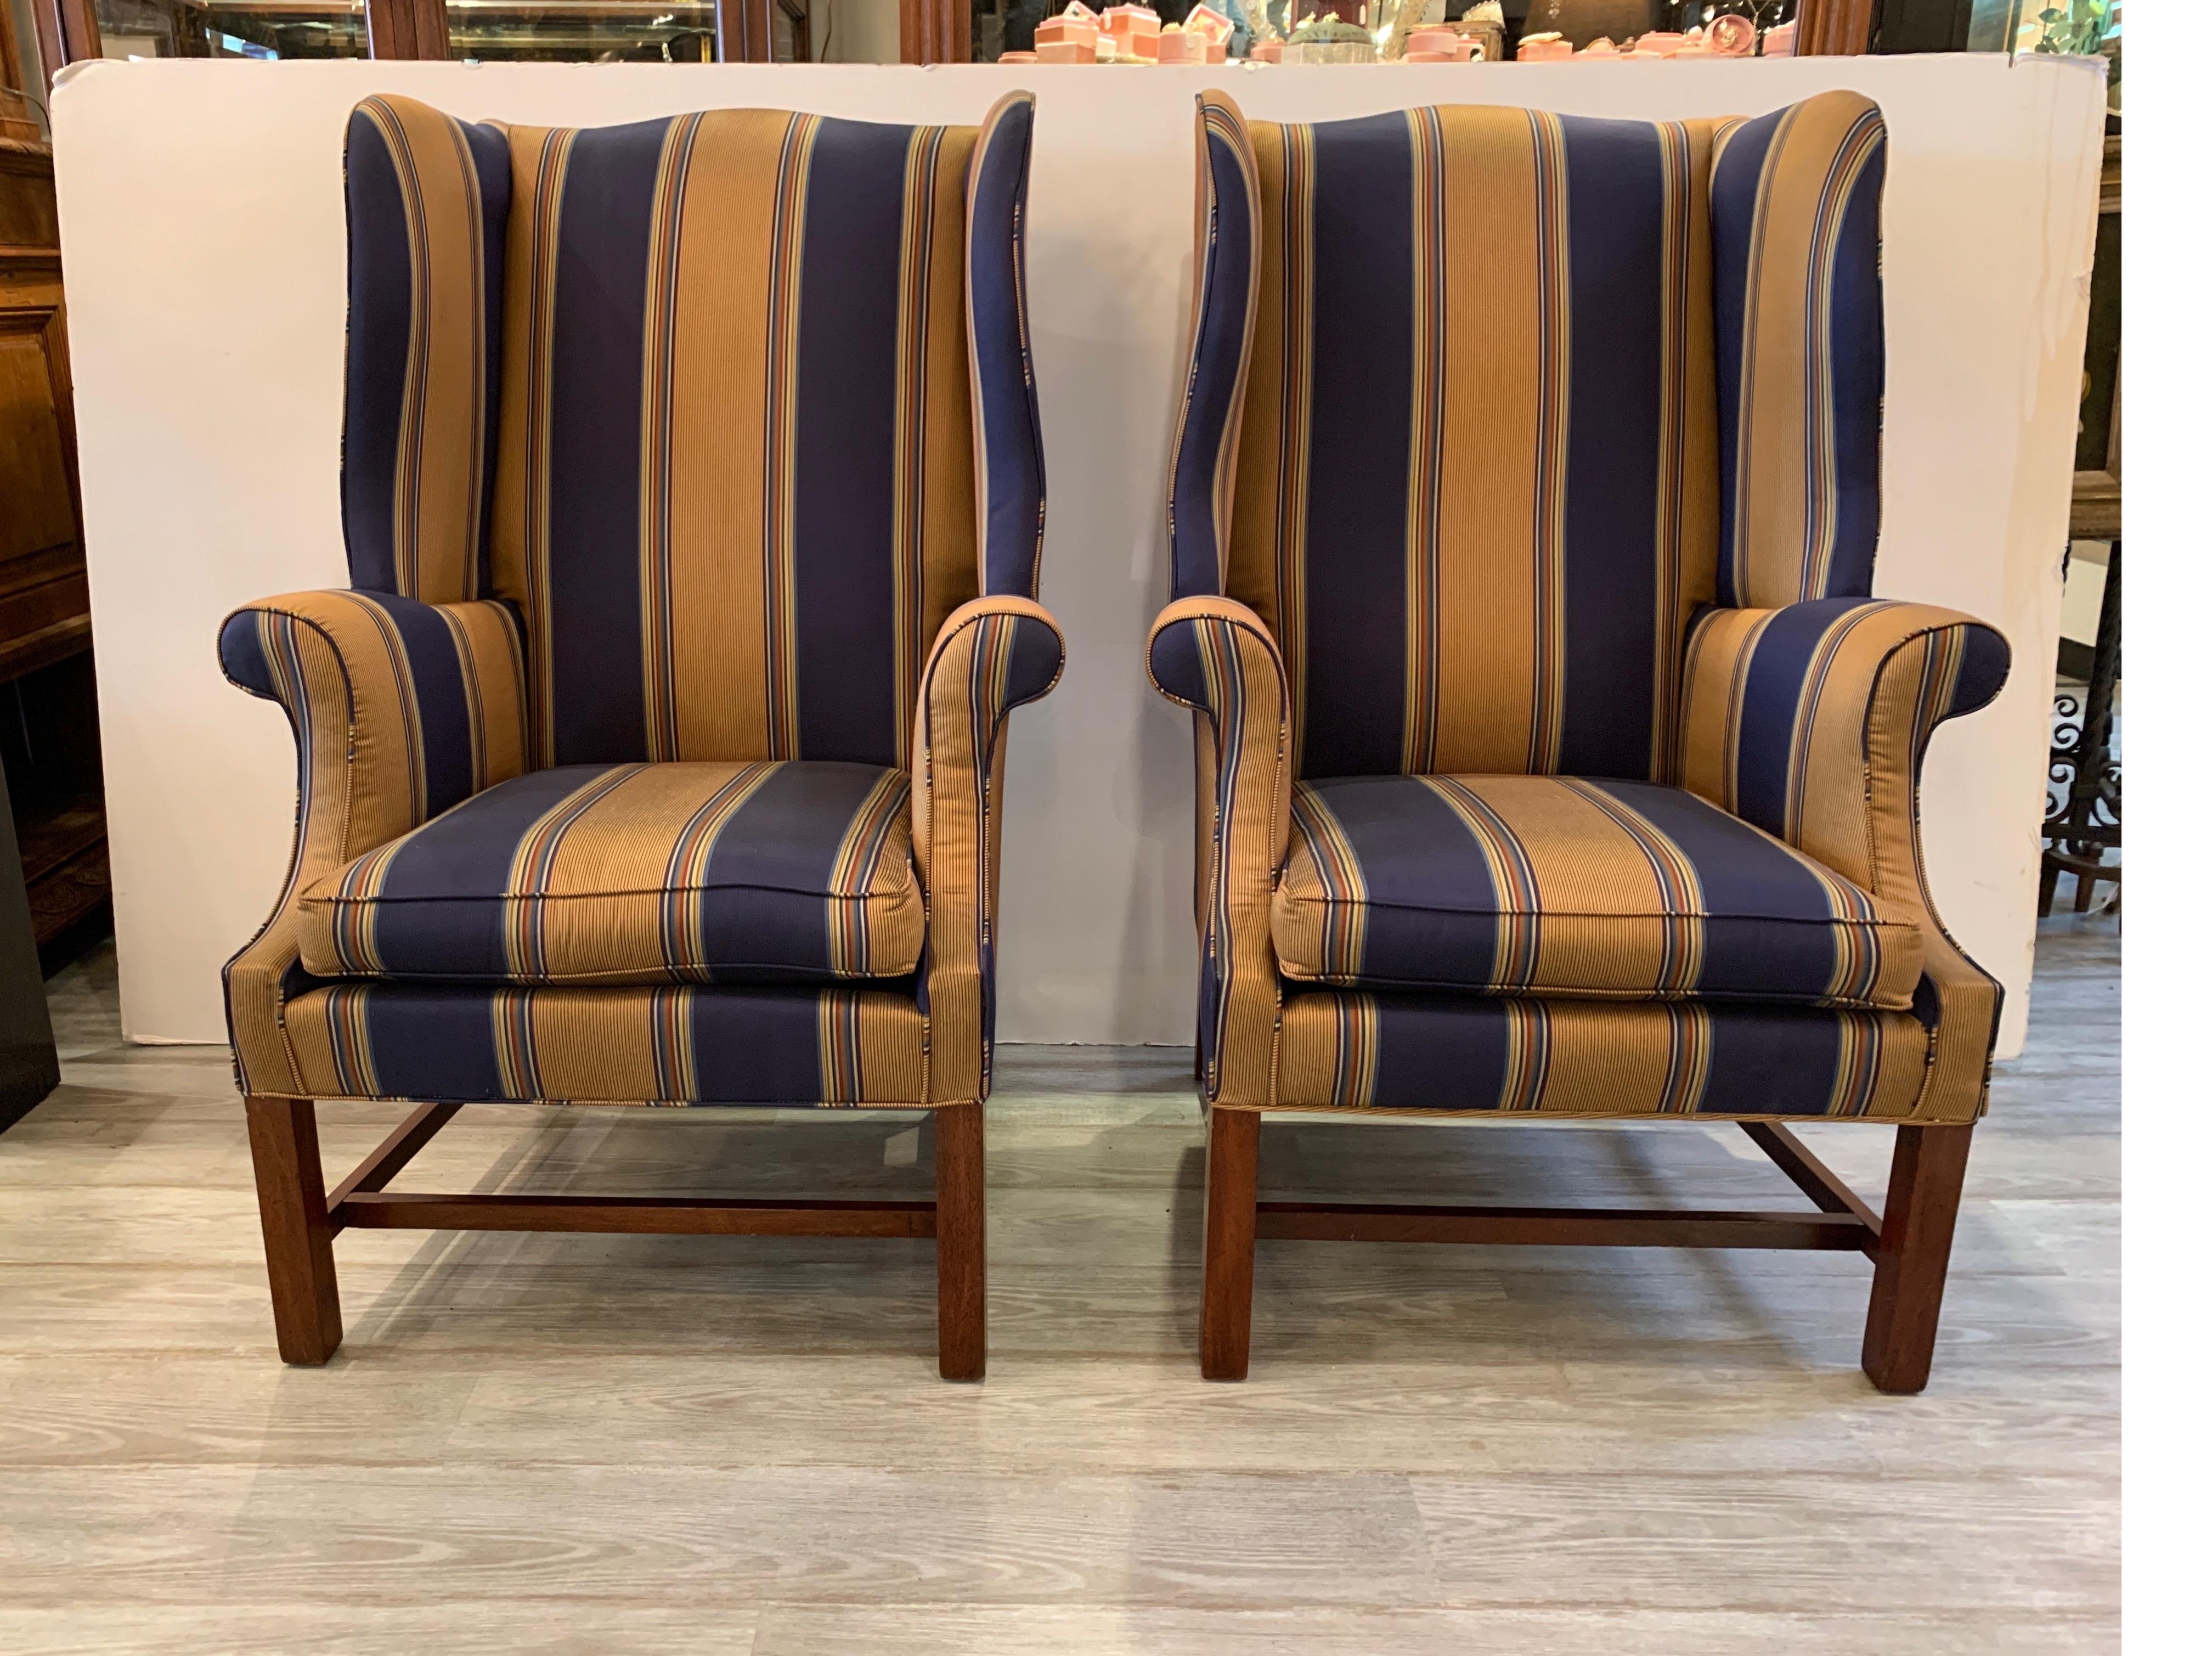 A nice pair of custom decorator navy and gold stripped wing chairs with mahogany Chinese Chippendale legs. The chairs are a nice size at 30 wide, and 30 deep, with a high back of 45 inches tall. These are custom chairs from a decorator manufacturer.